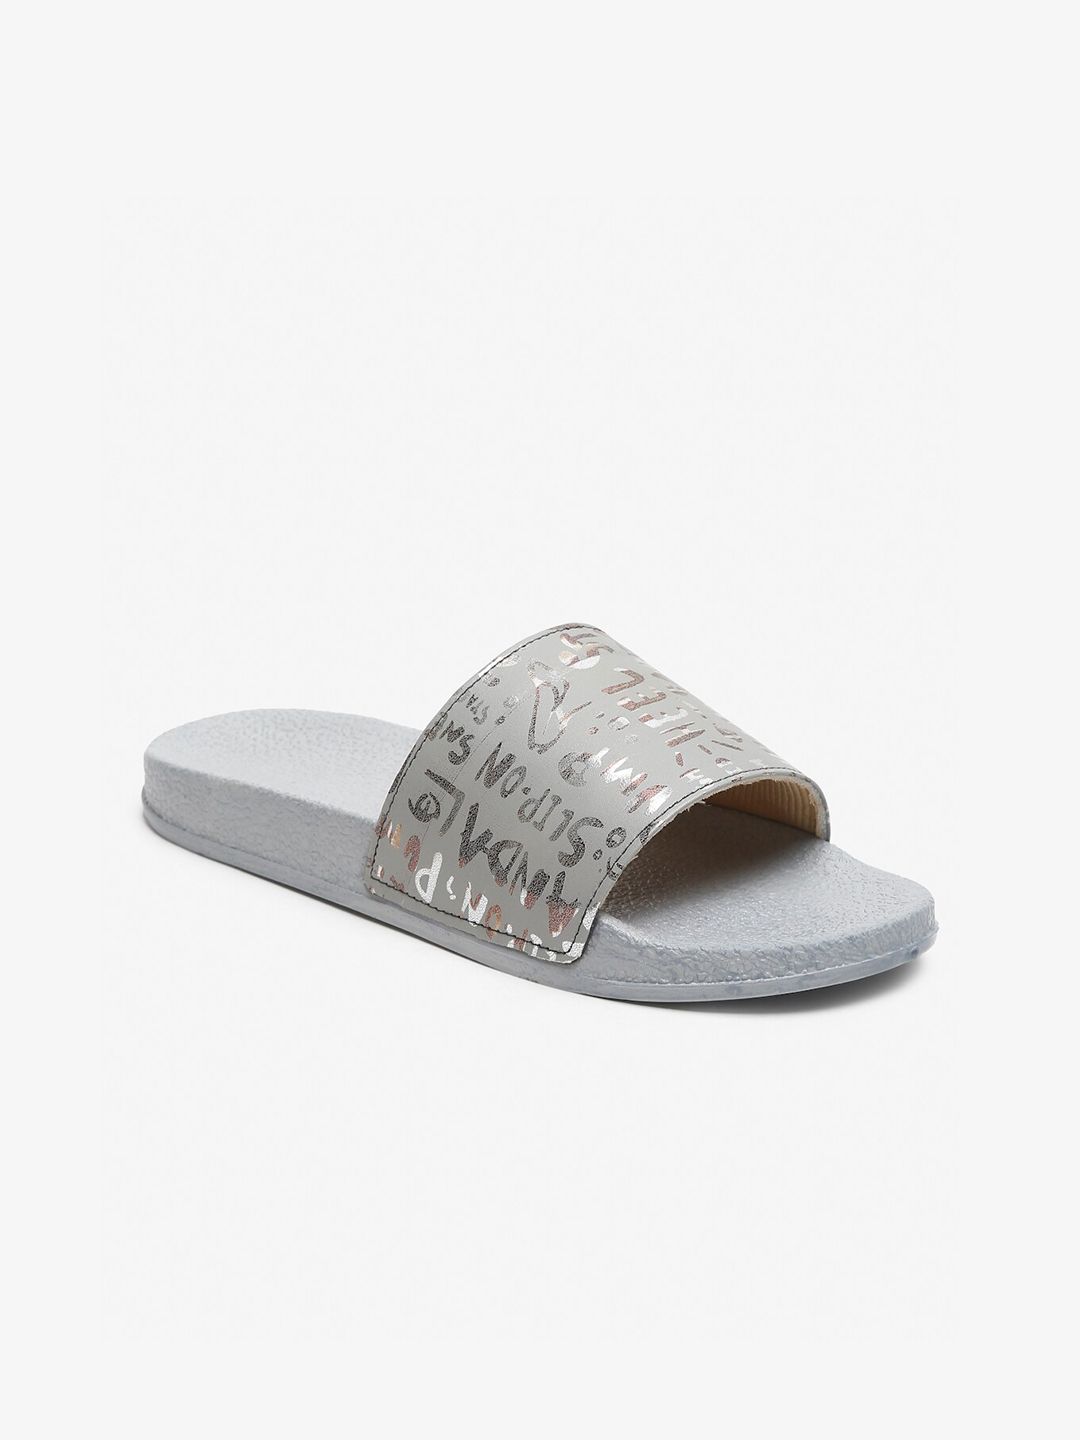 Misto Women Grey & Silver-Toned Printed Sliders Price in India